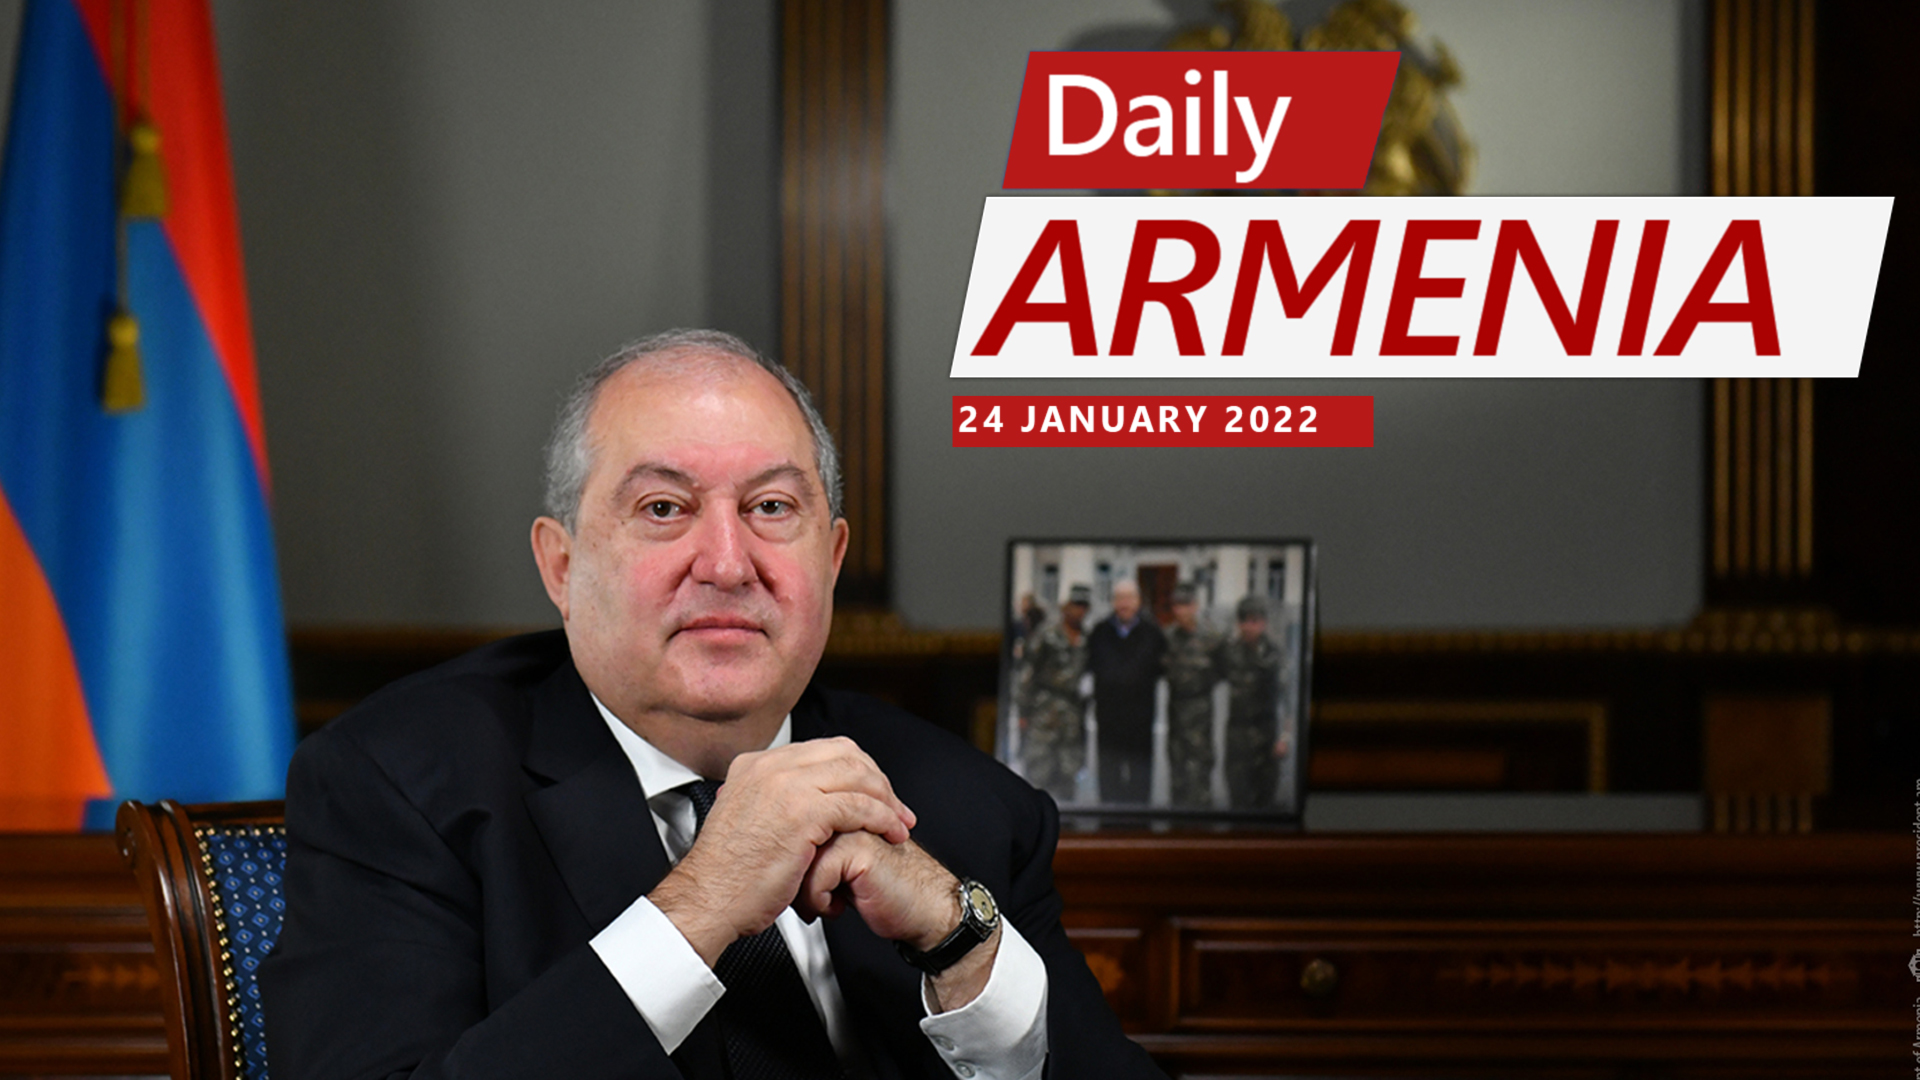 Armenian President Armen Sarkissian to resign from his post